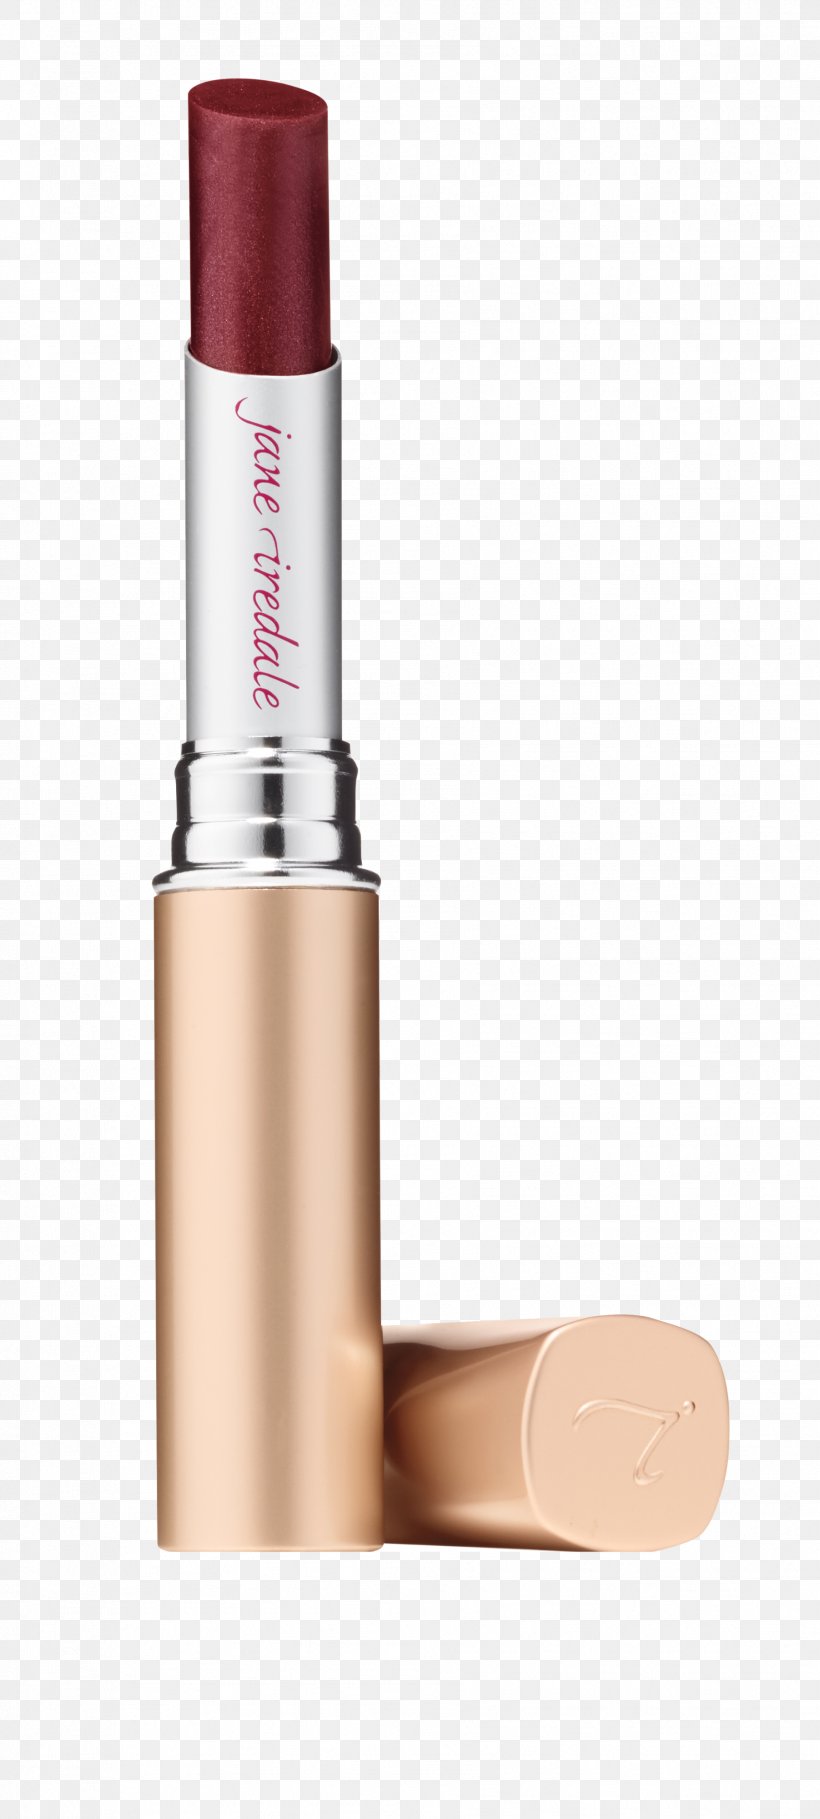 Jane Iredale PureMoist Lipstick Cosmetics Lip Gloss Lip Liner, PNG, 1803x4000px, Cosmetics, Beauty, Color, Compact, Eye Liner Download Free